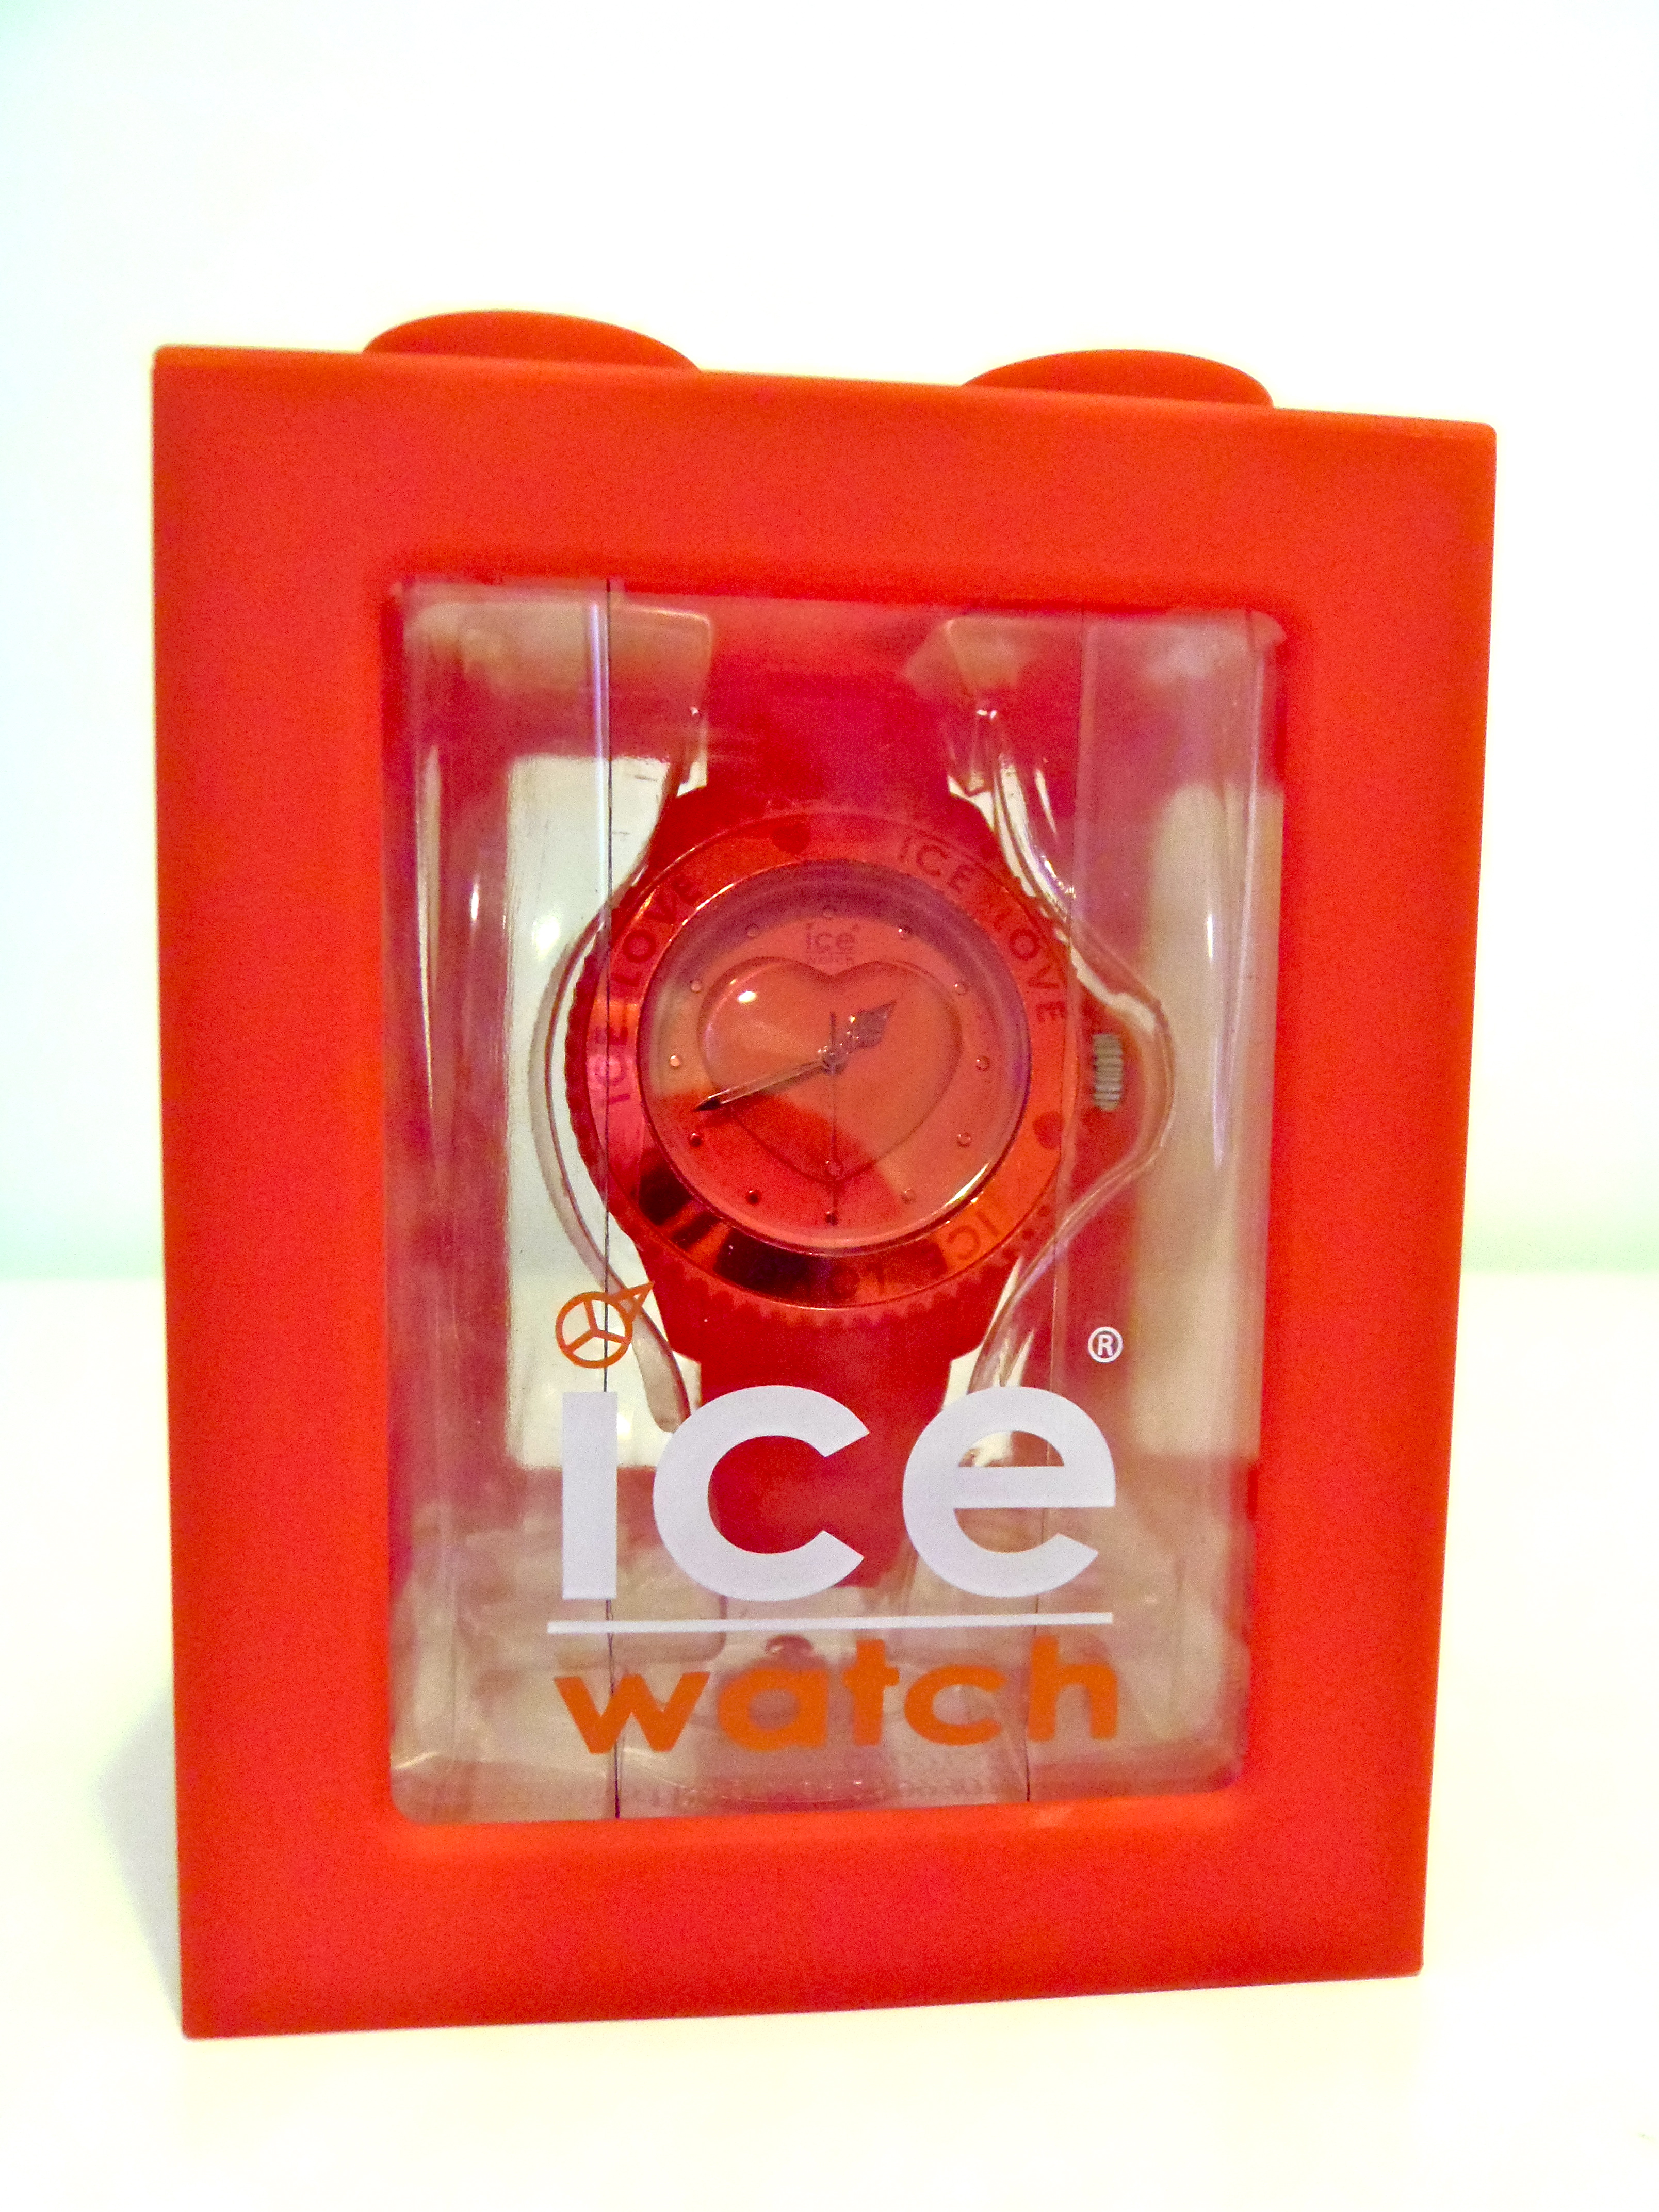 ice watch red